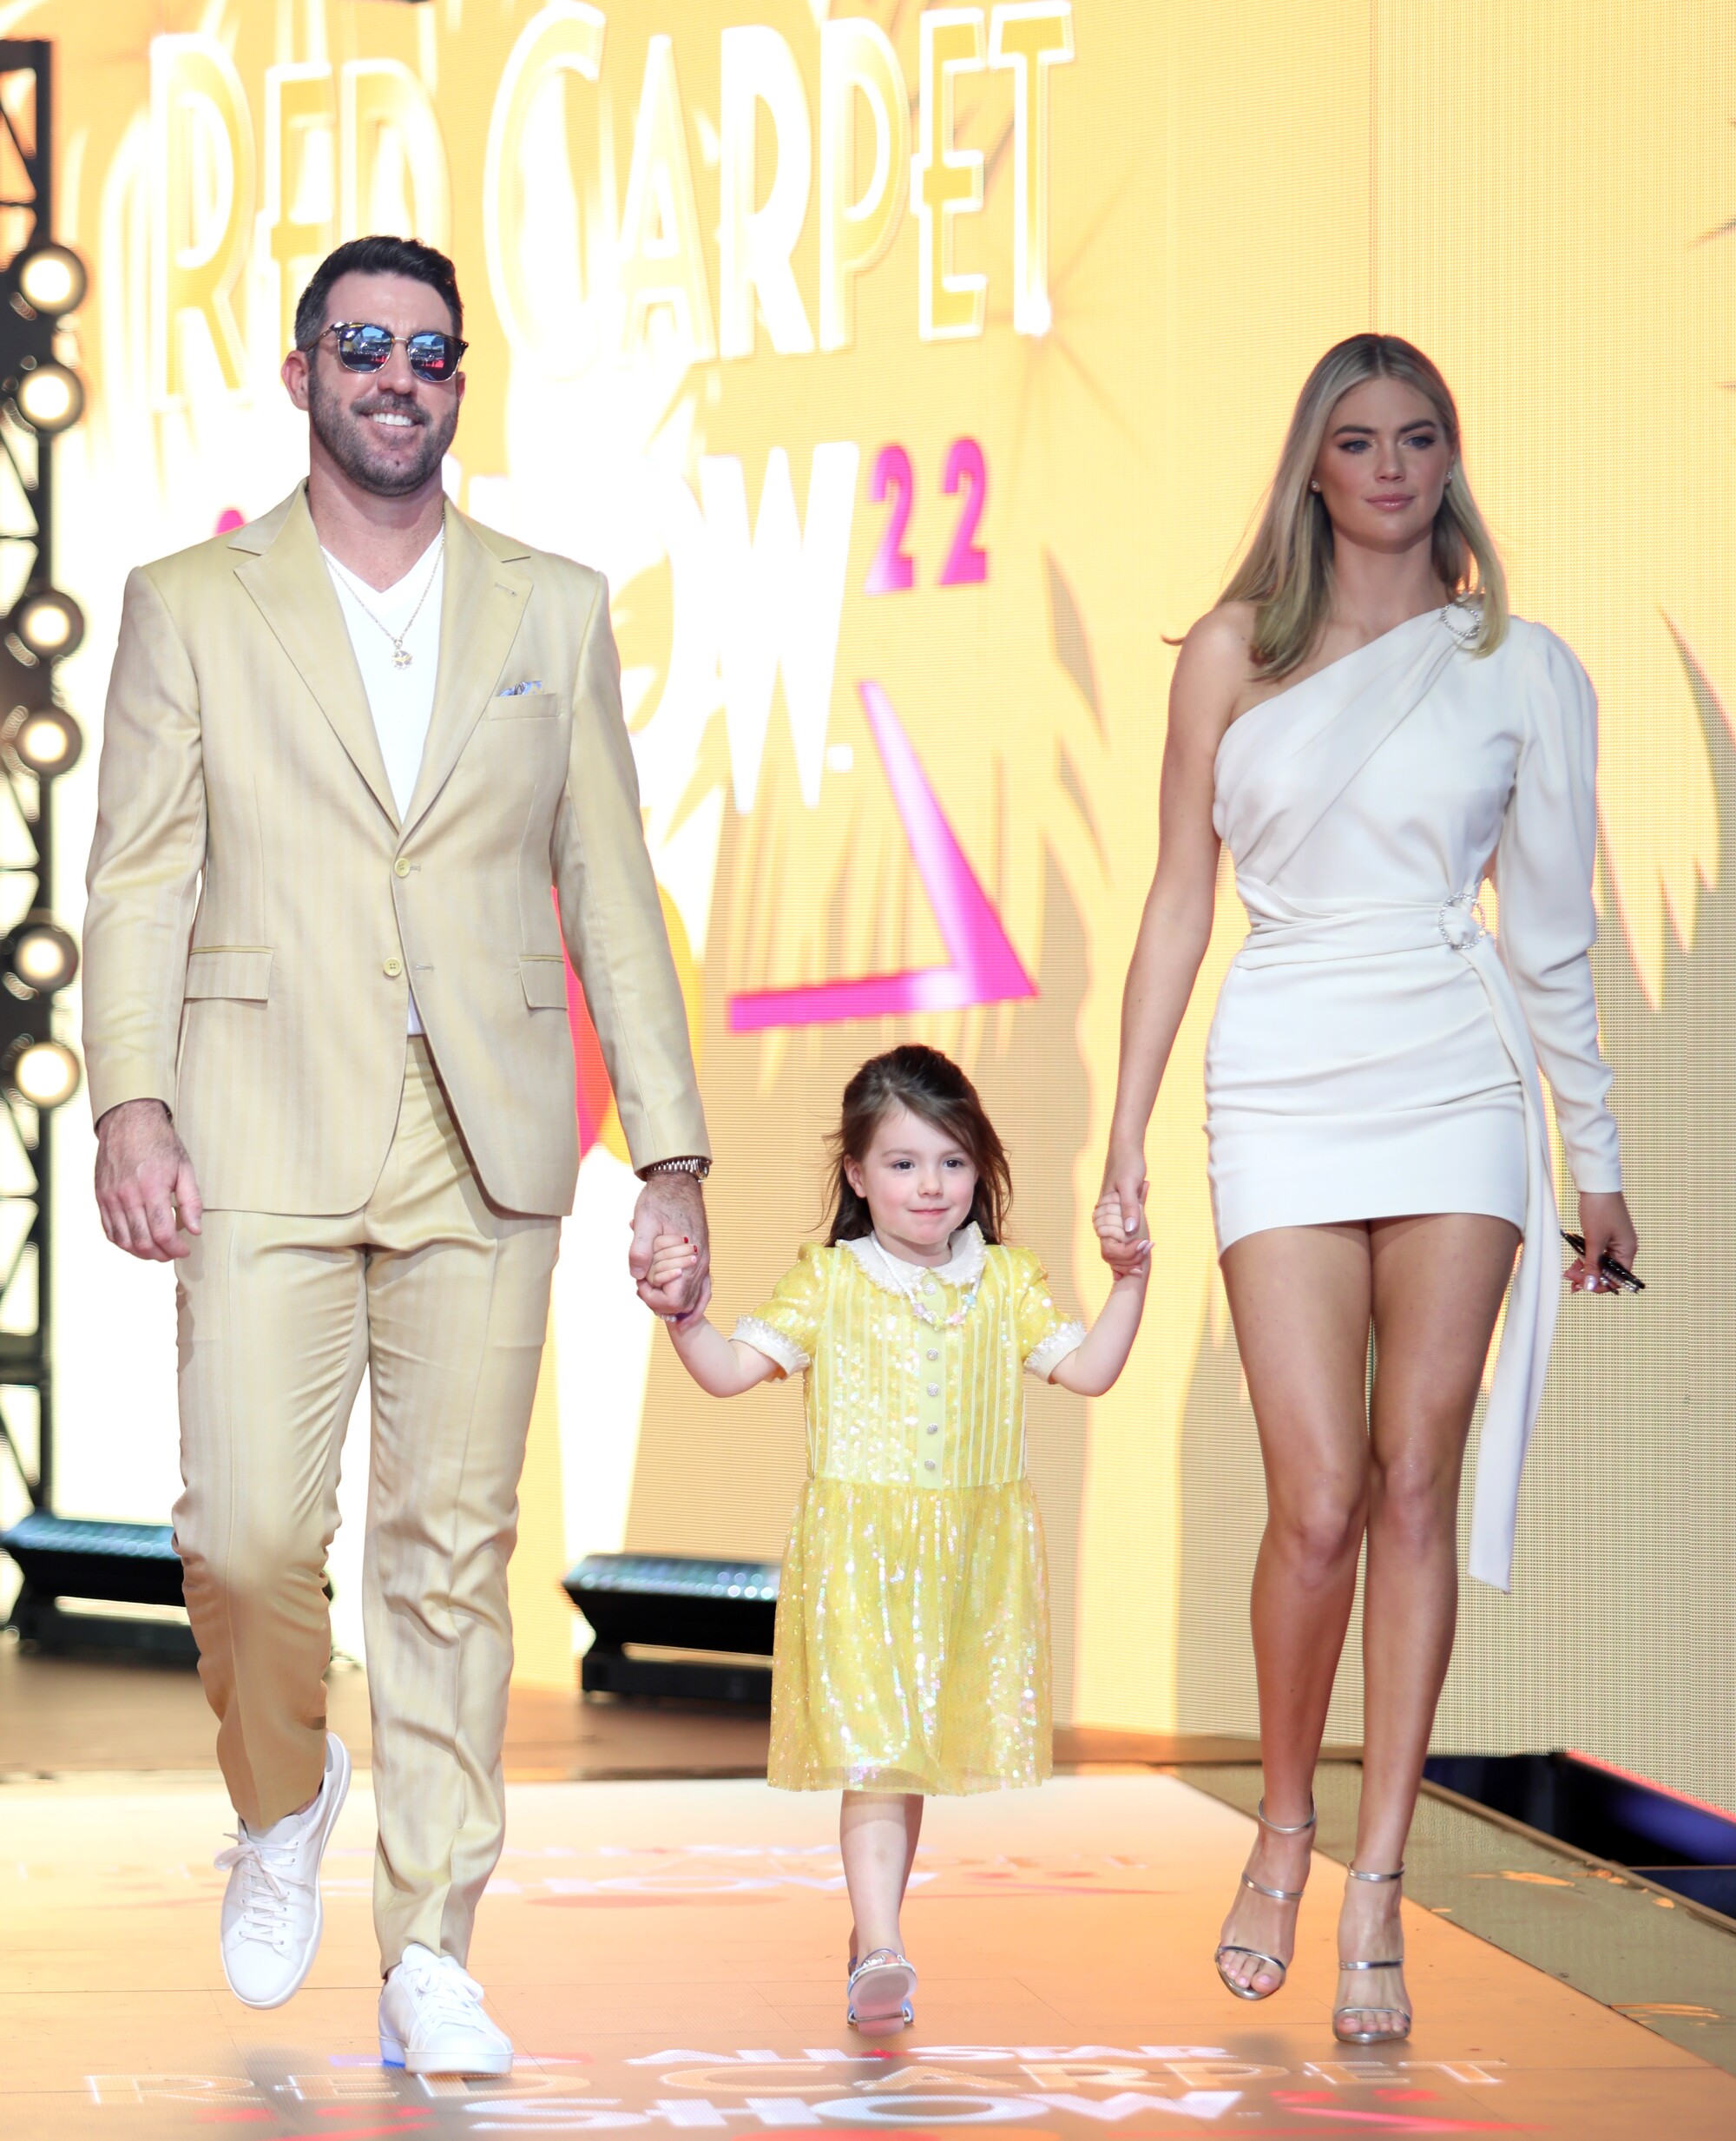 Houston Astros pitcher Justin Verlander, Kate Upton and their daughter arrive on the red carpet for the 2022 MLB All-Star Game.